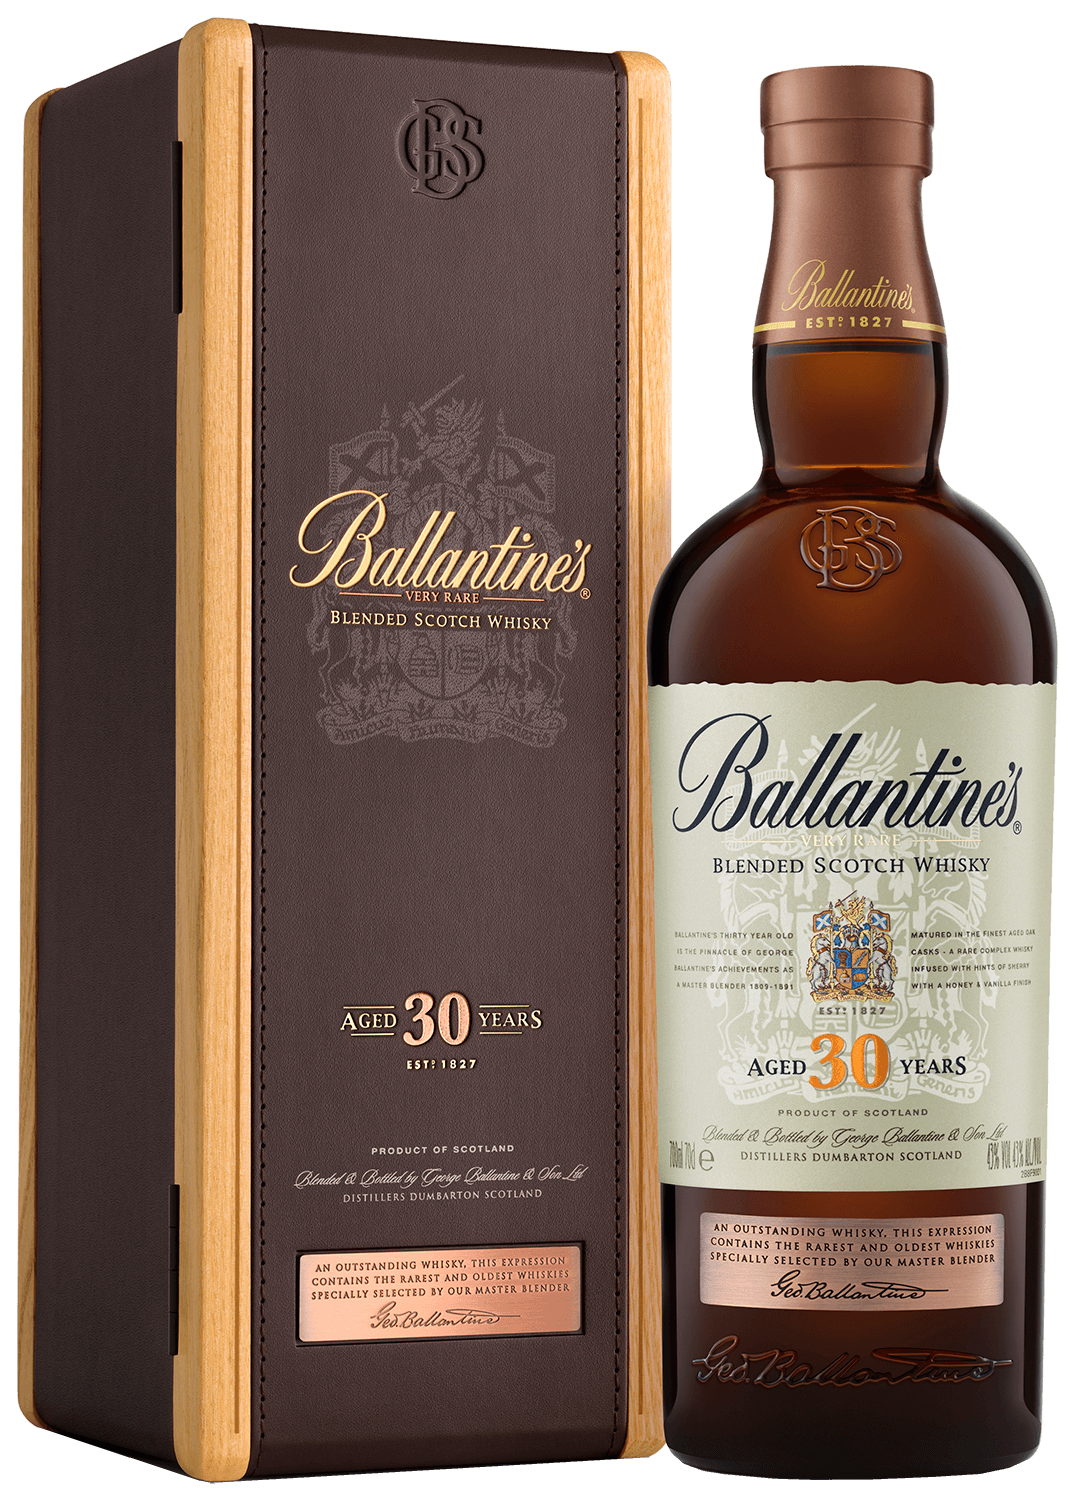 Ballantine's 30 Years Old blended scotch whisky (gift box)